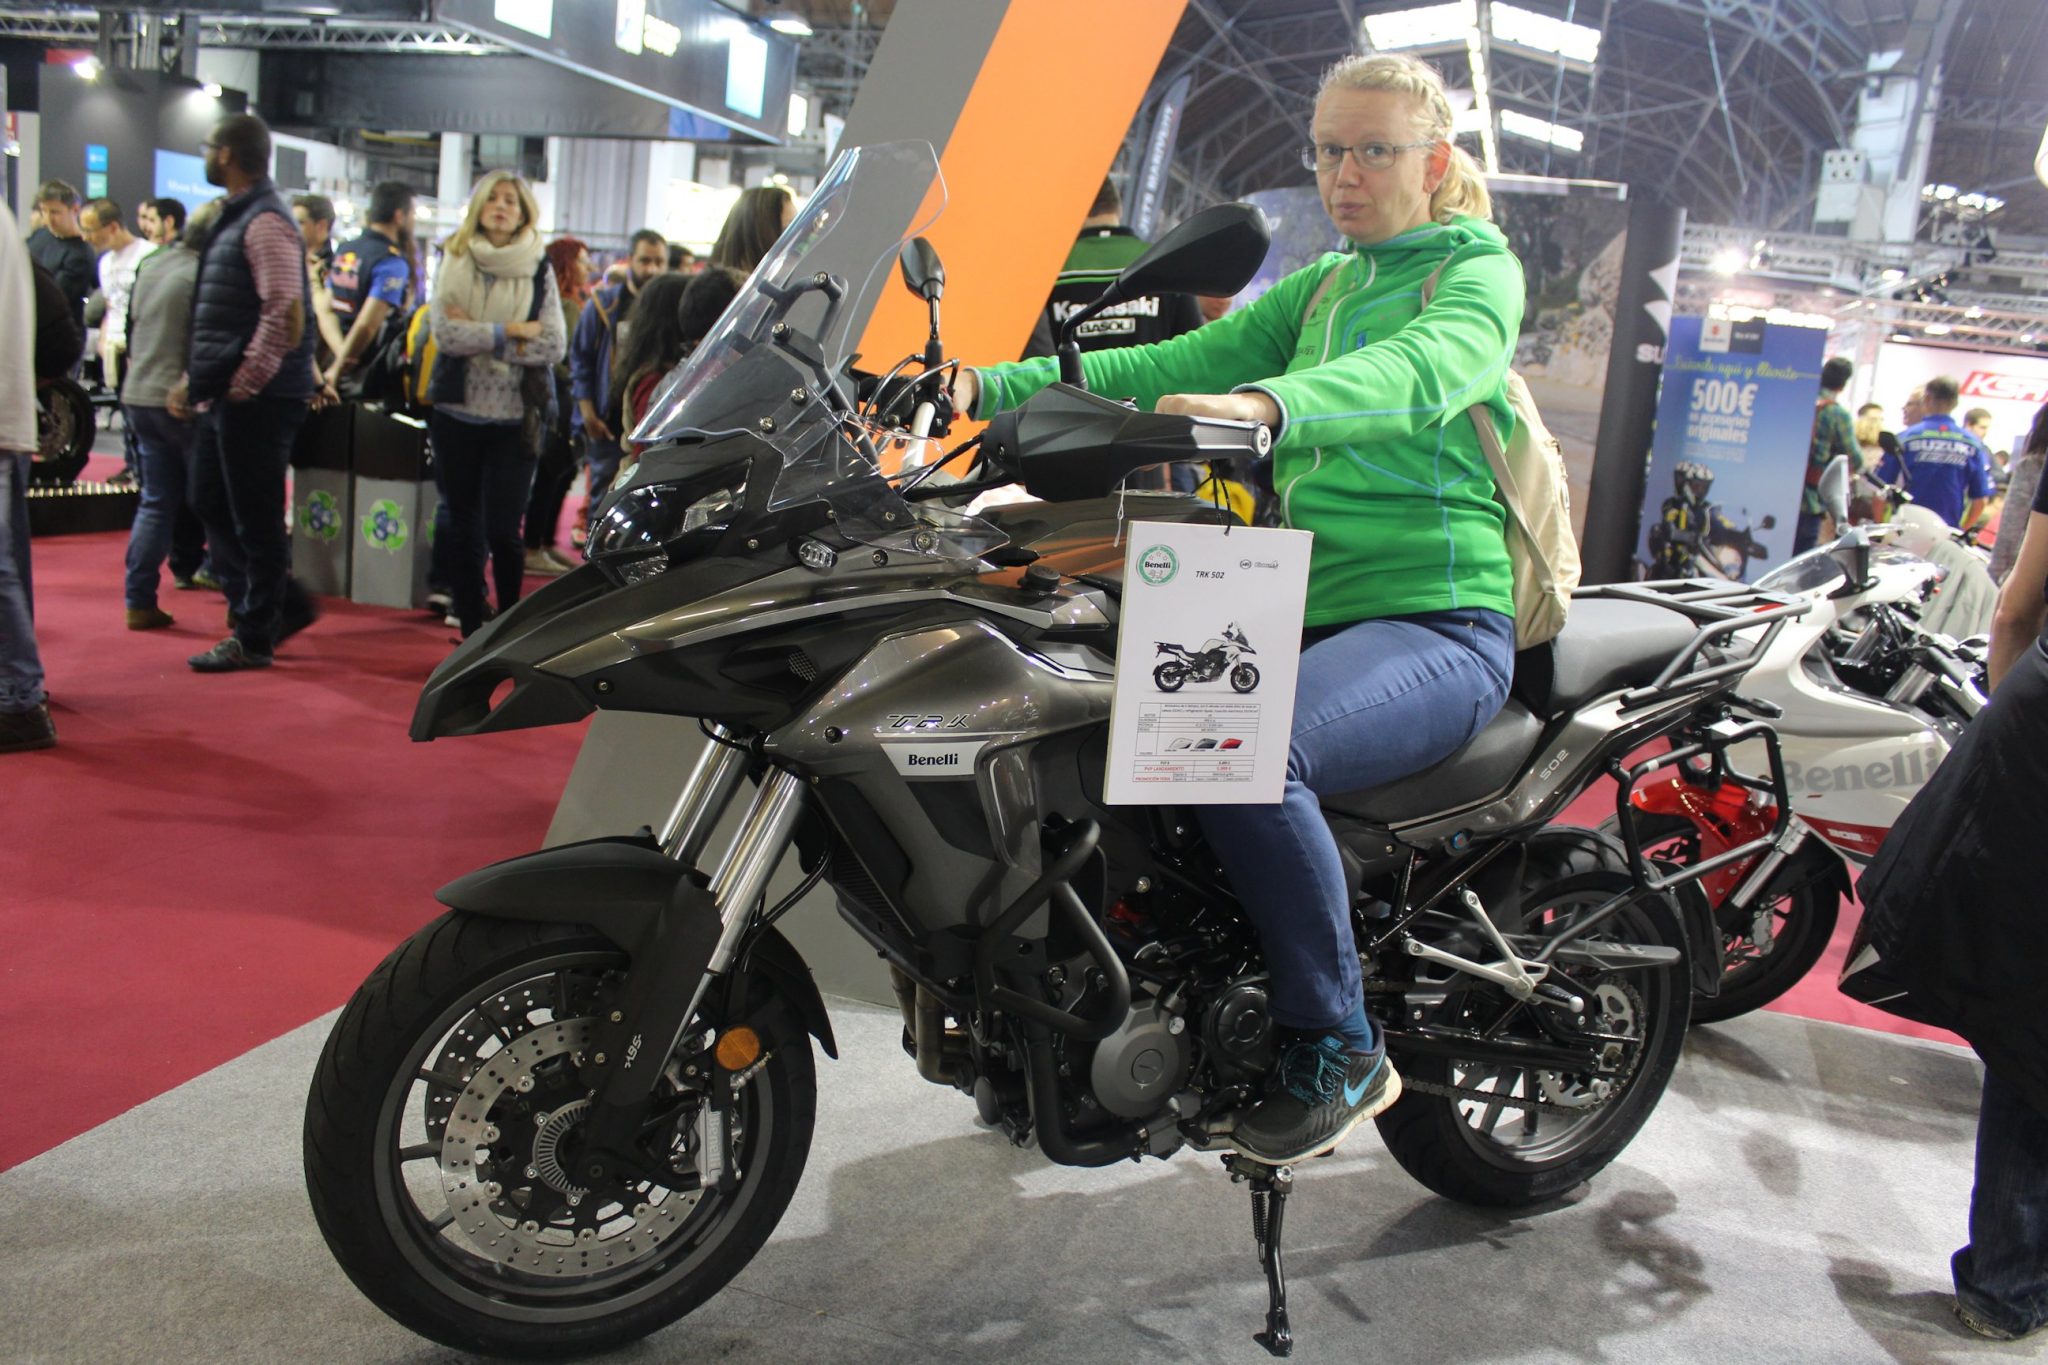 This 500cc from Benelli looked promising but the seating position was too cramped for my legs, and later investigation found that the weight was 235 (!) kg.